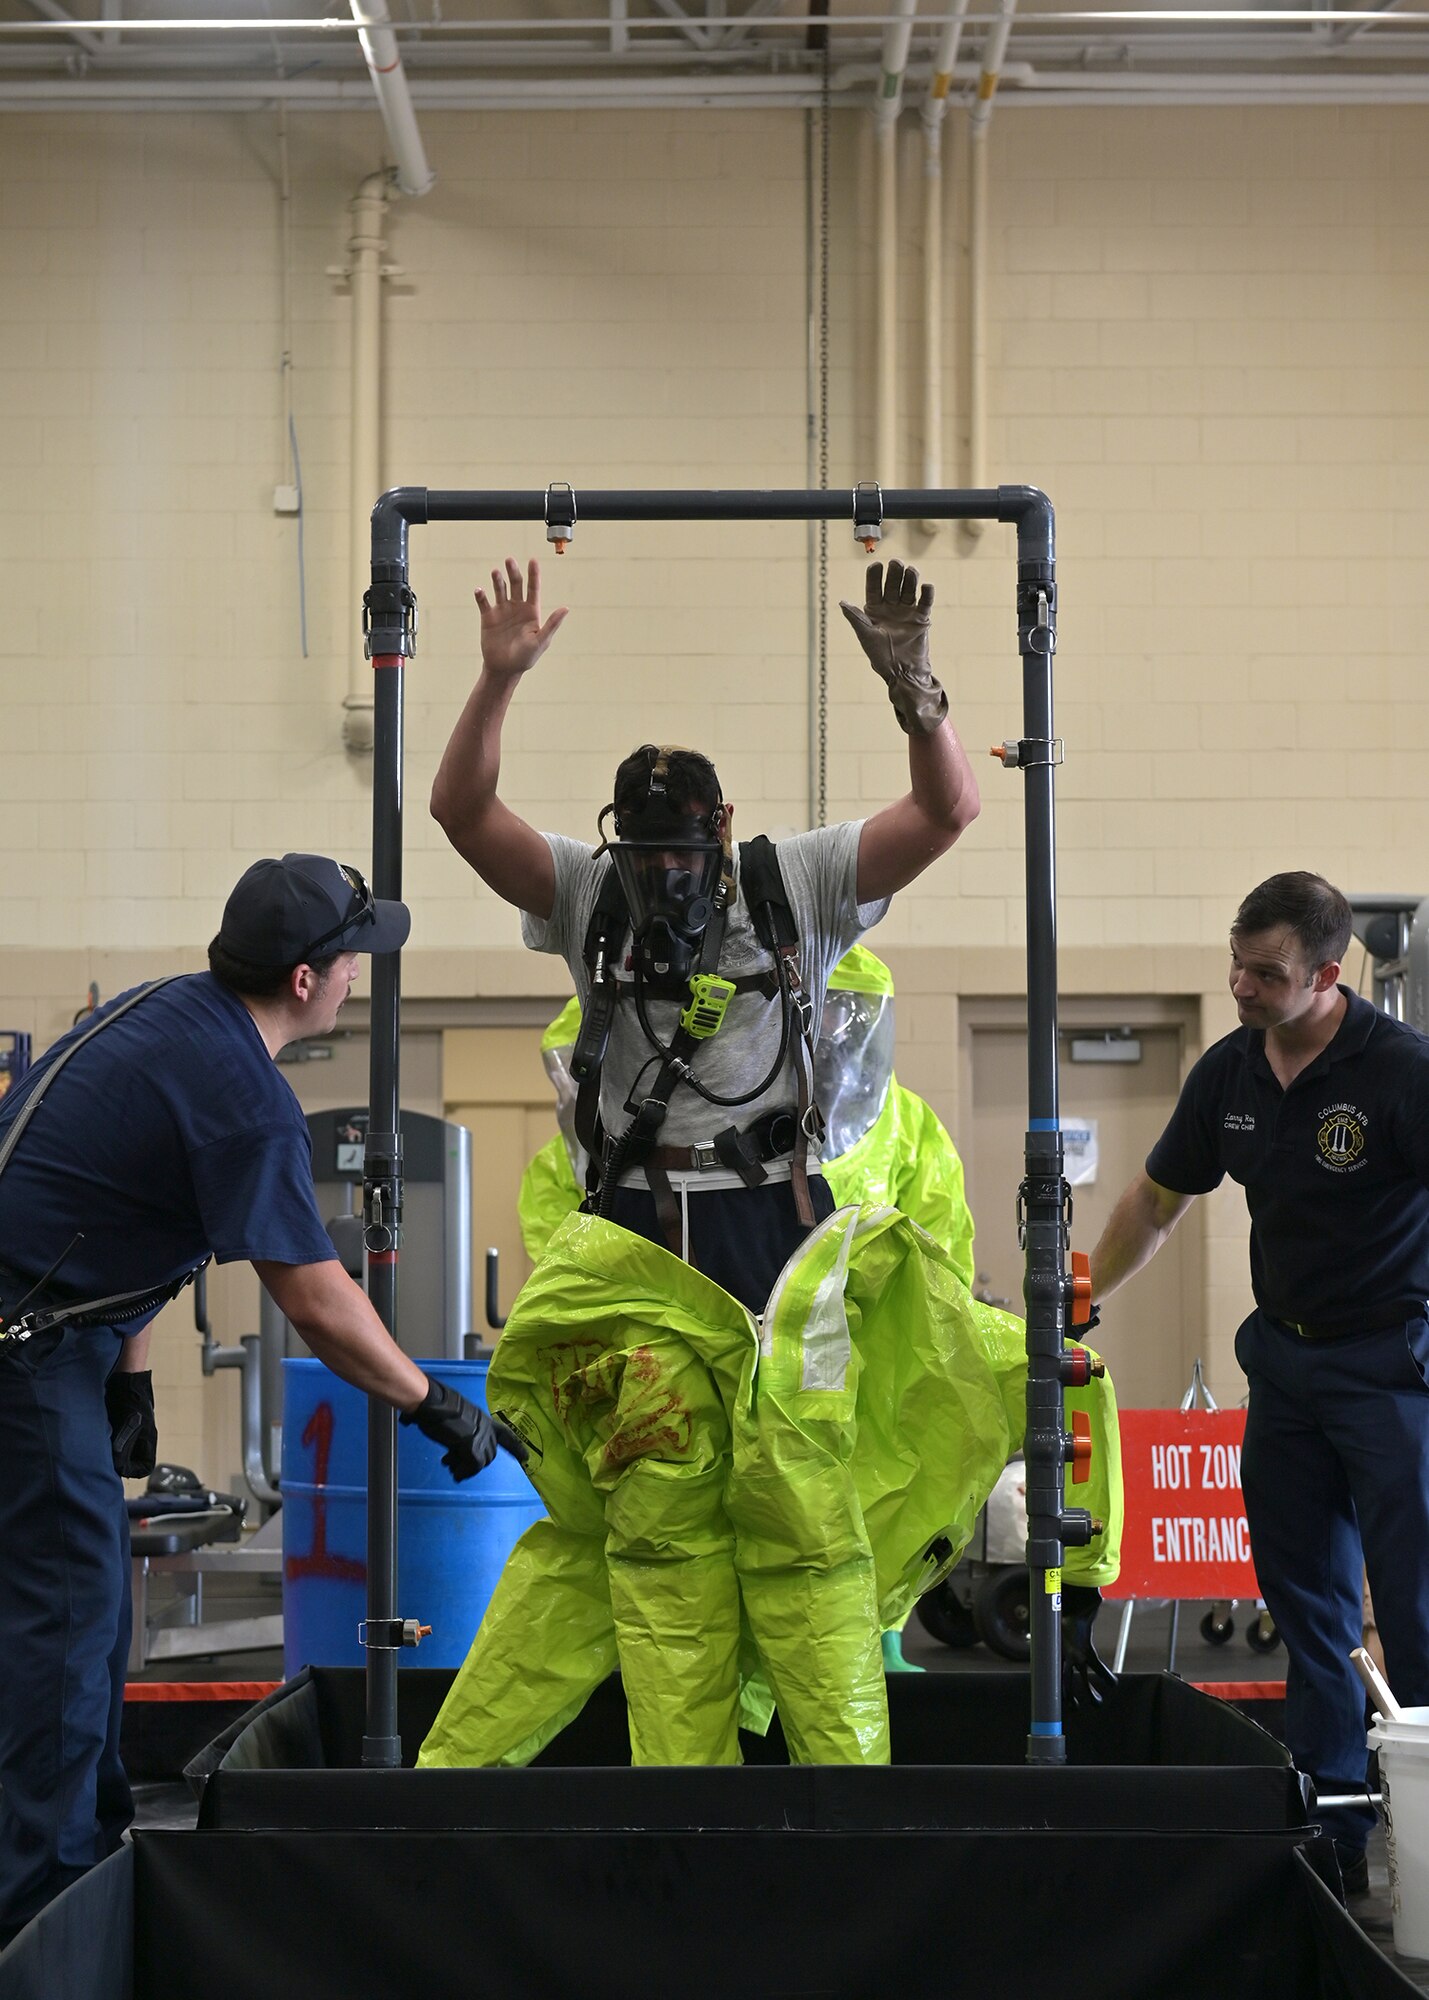 Firefighters decontaminate personnel exposed to simulated hazardous materials.